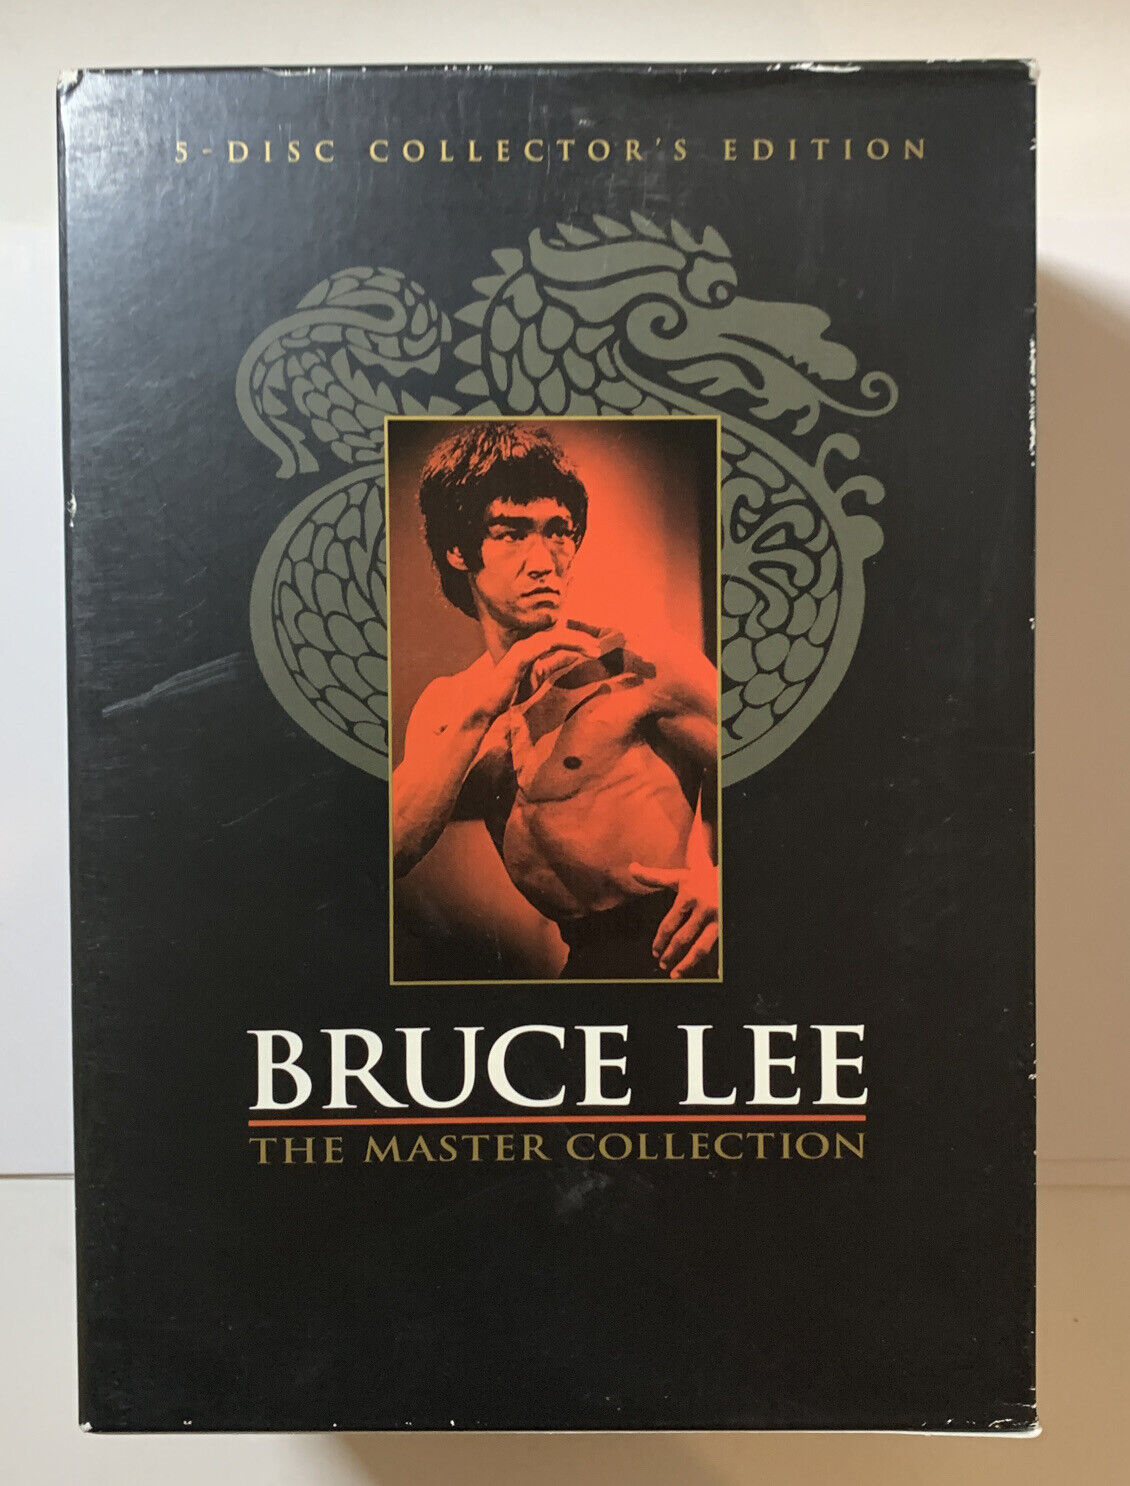 Bruce Lee - The Master Collection DVD (USA)